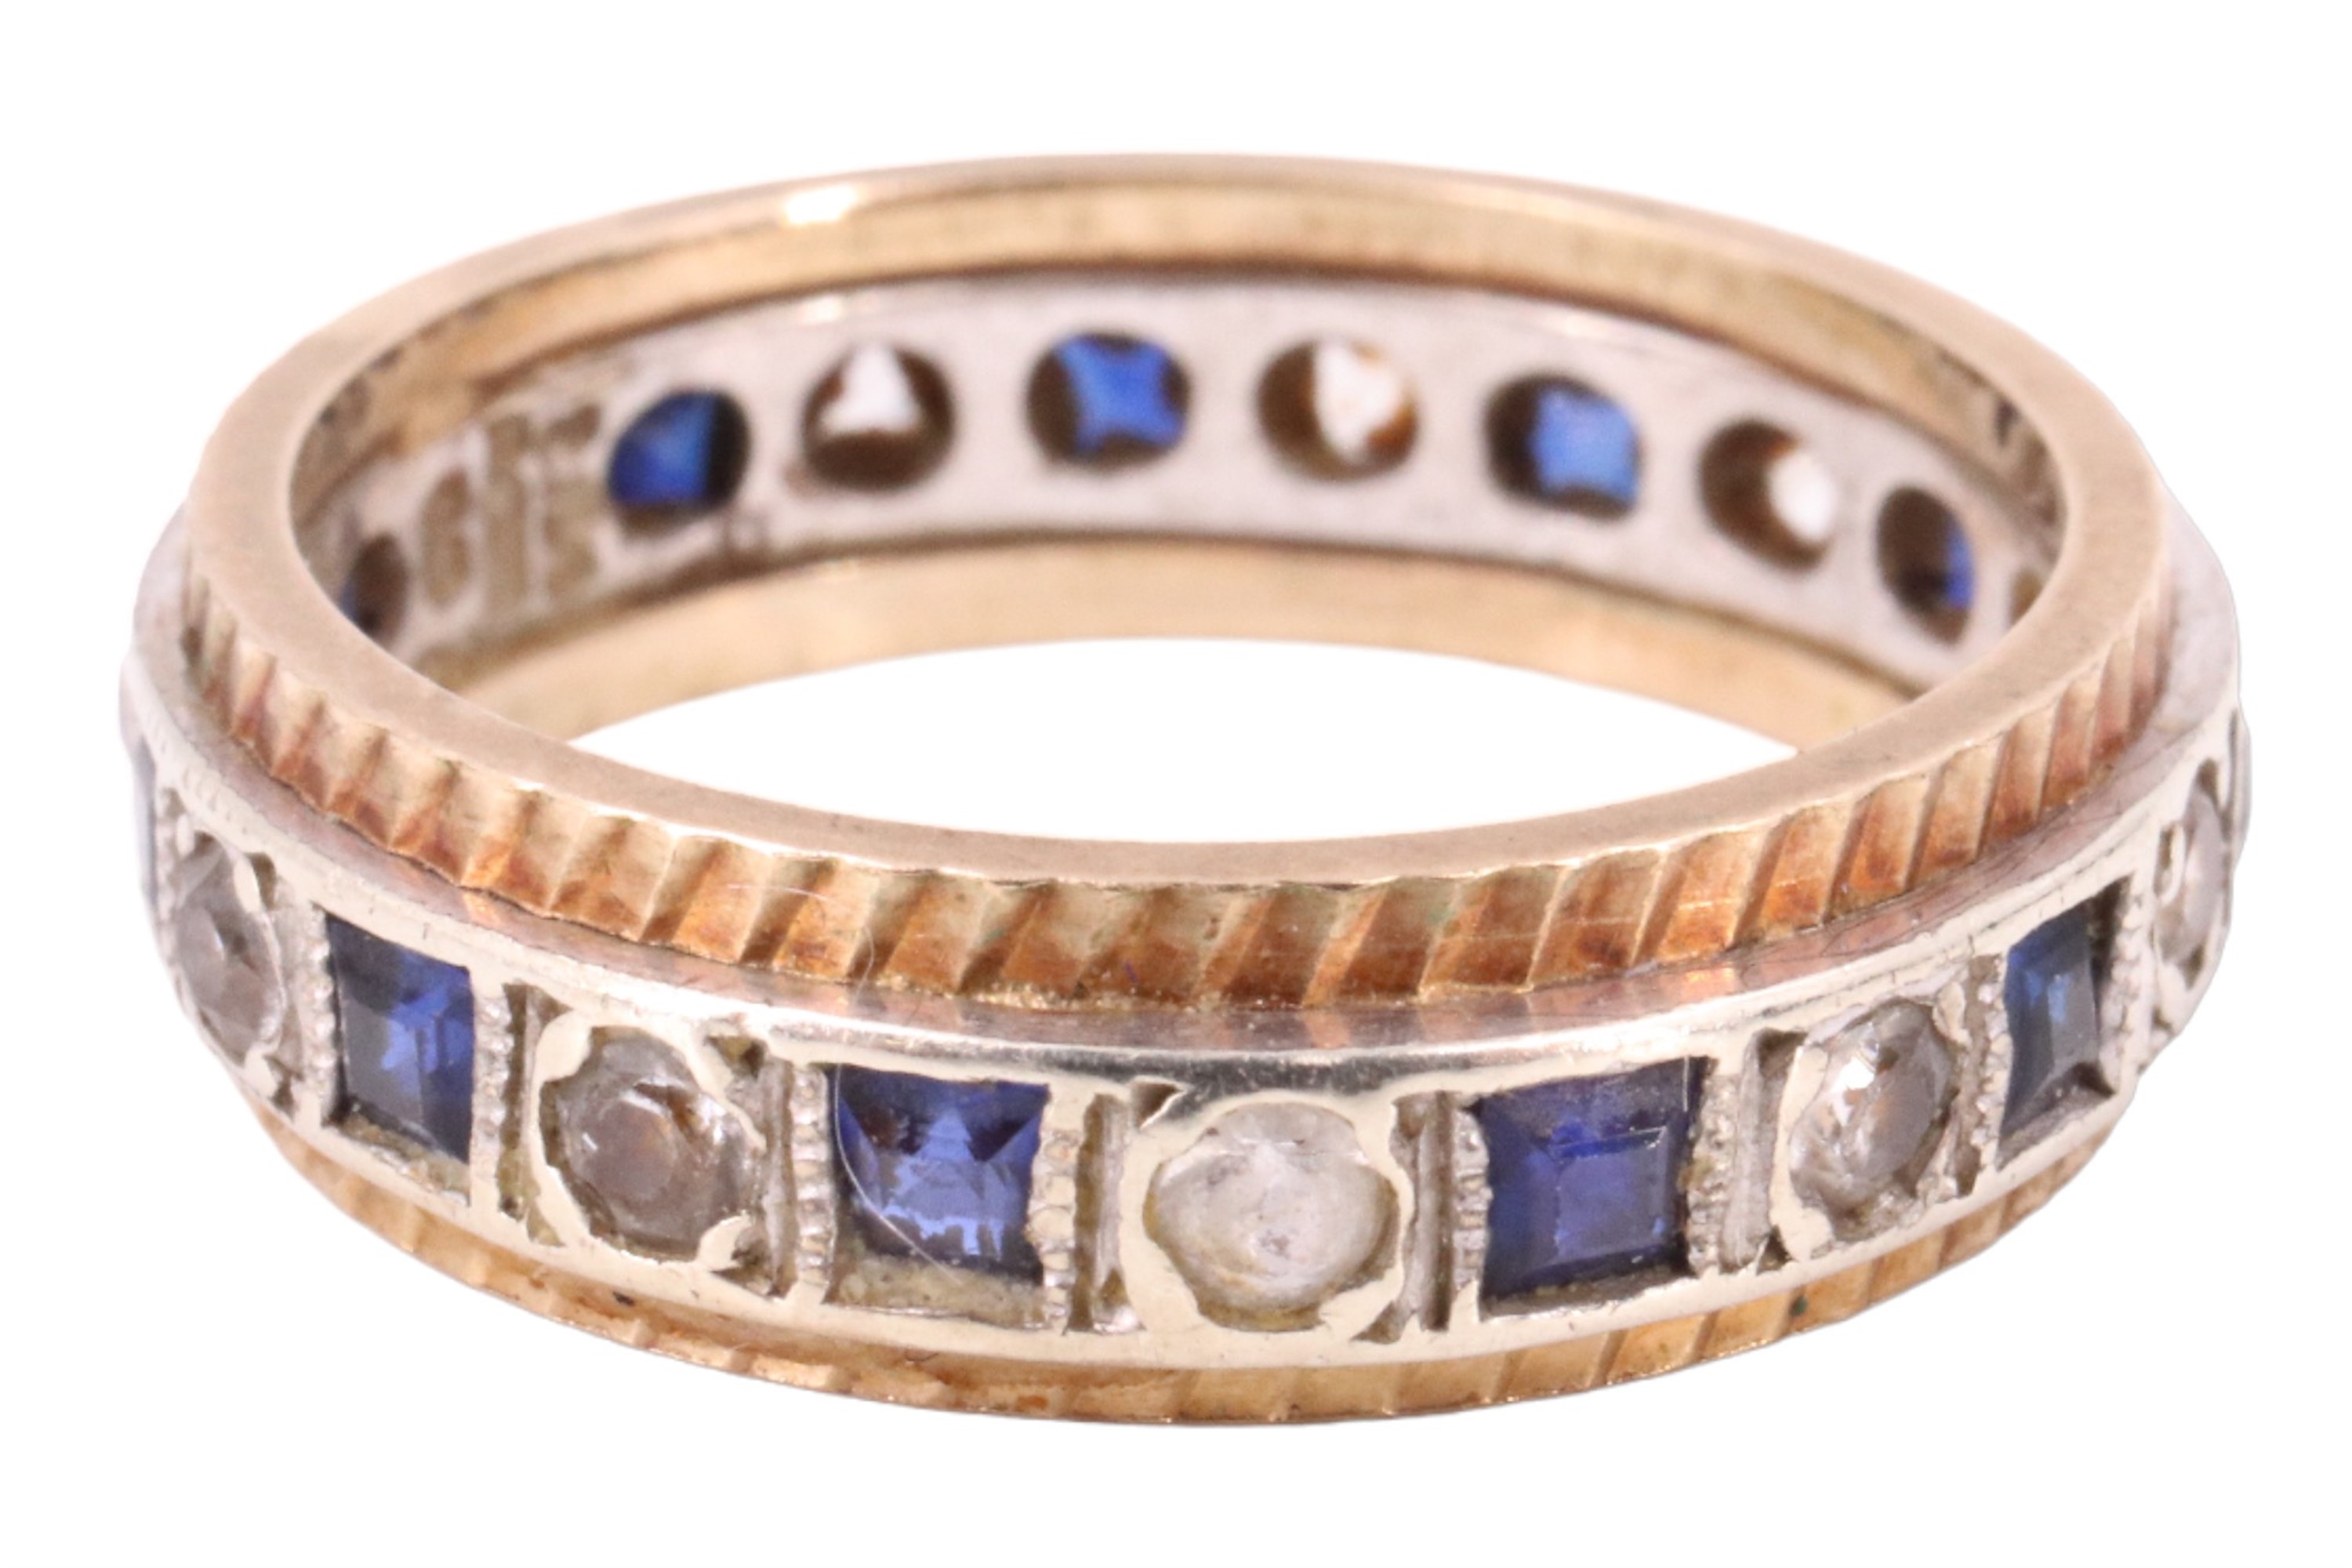 A blue sapphire and white spinel eternity ring, having 11 2 mm square sapphires separated by 11 2 mm